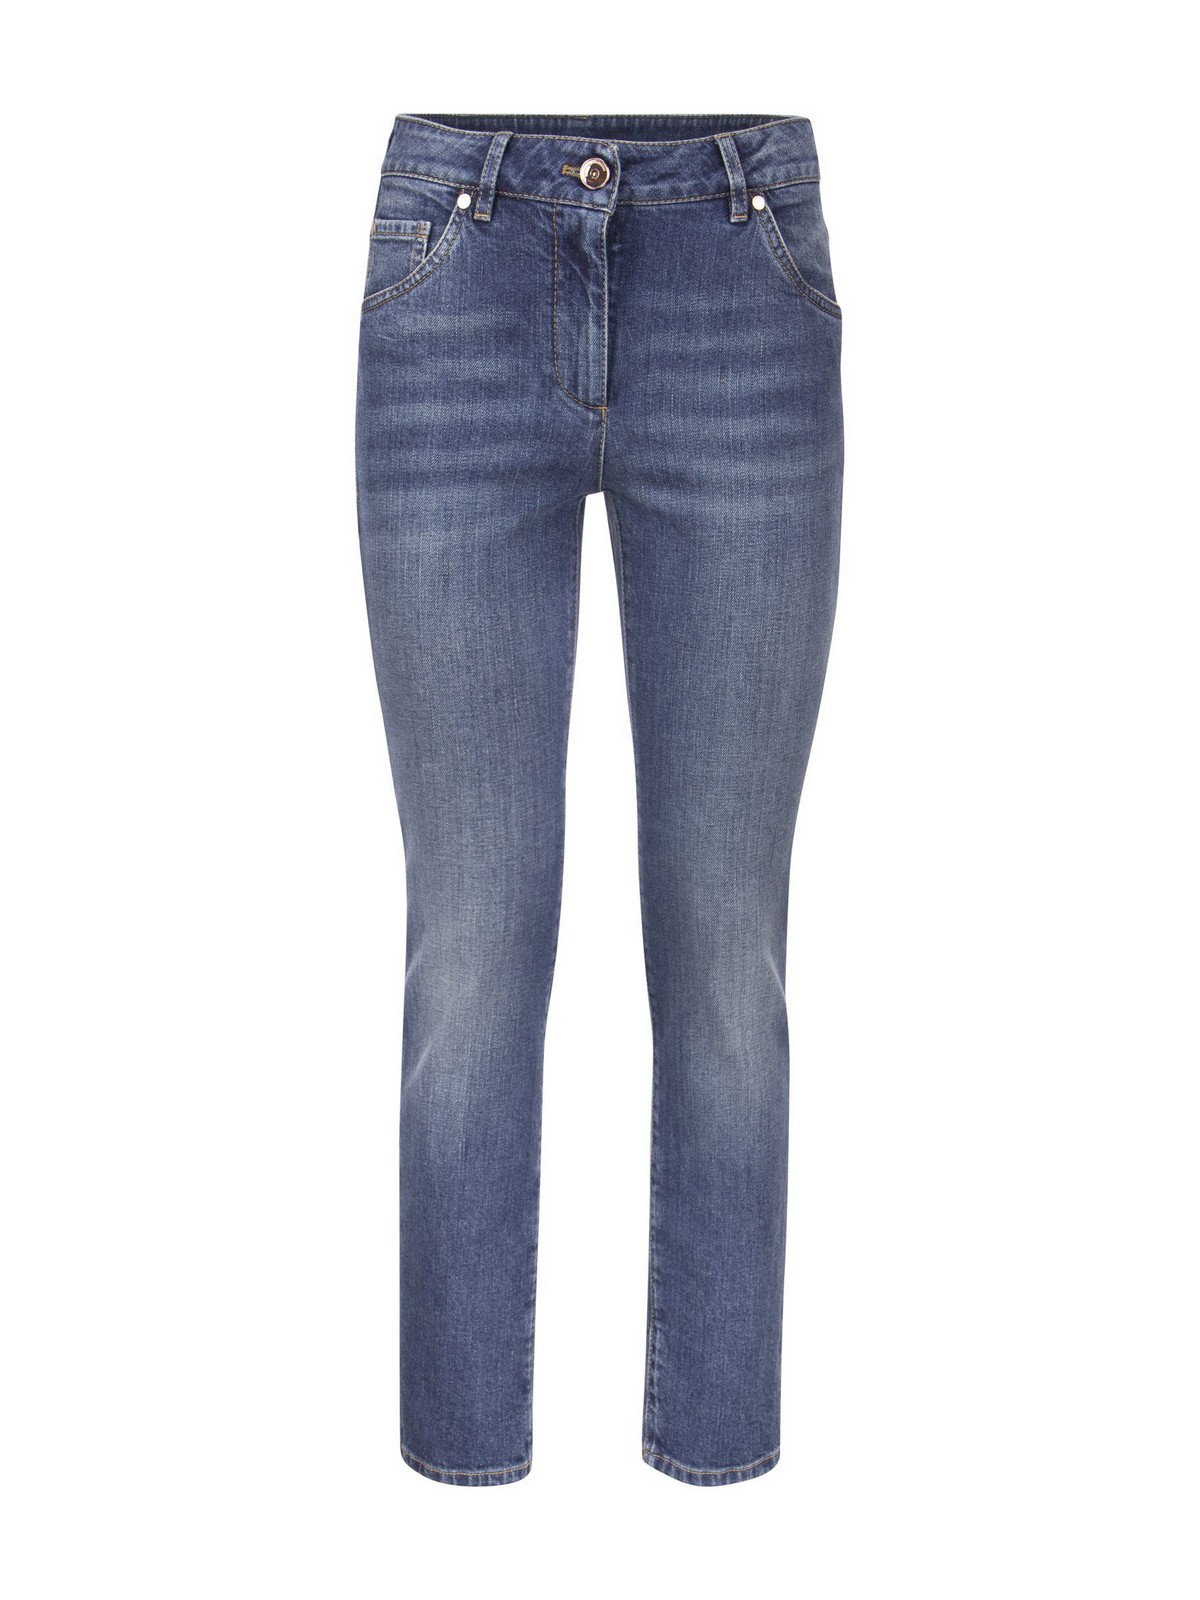 Straight leg jeans Brunello Cucinelli - Denim jeans with shiny leather ...